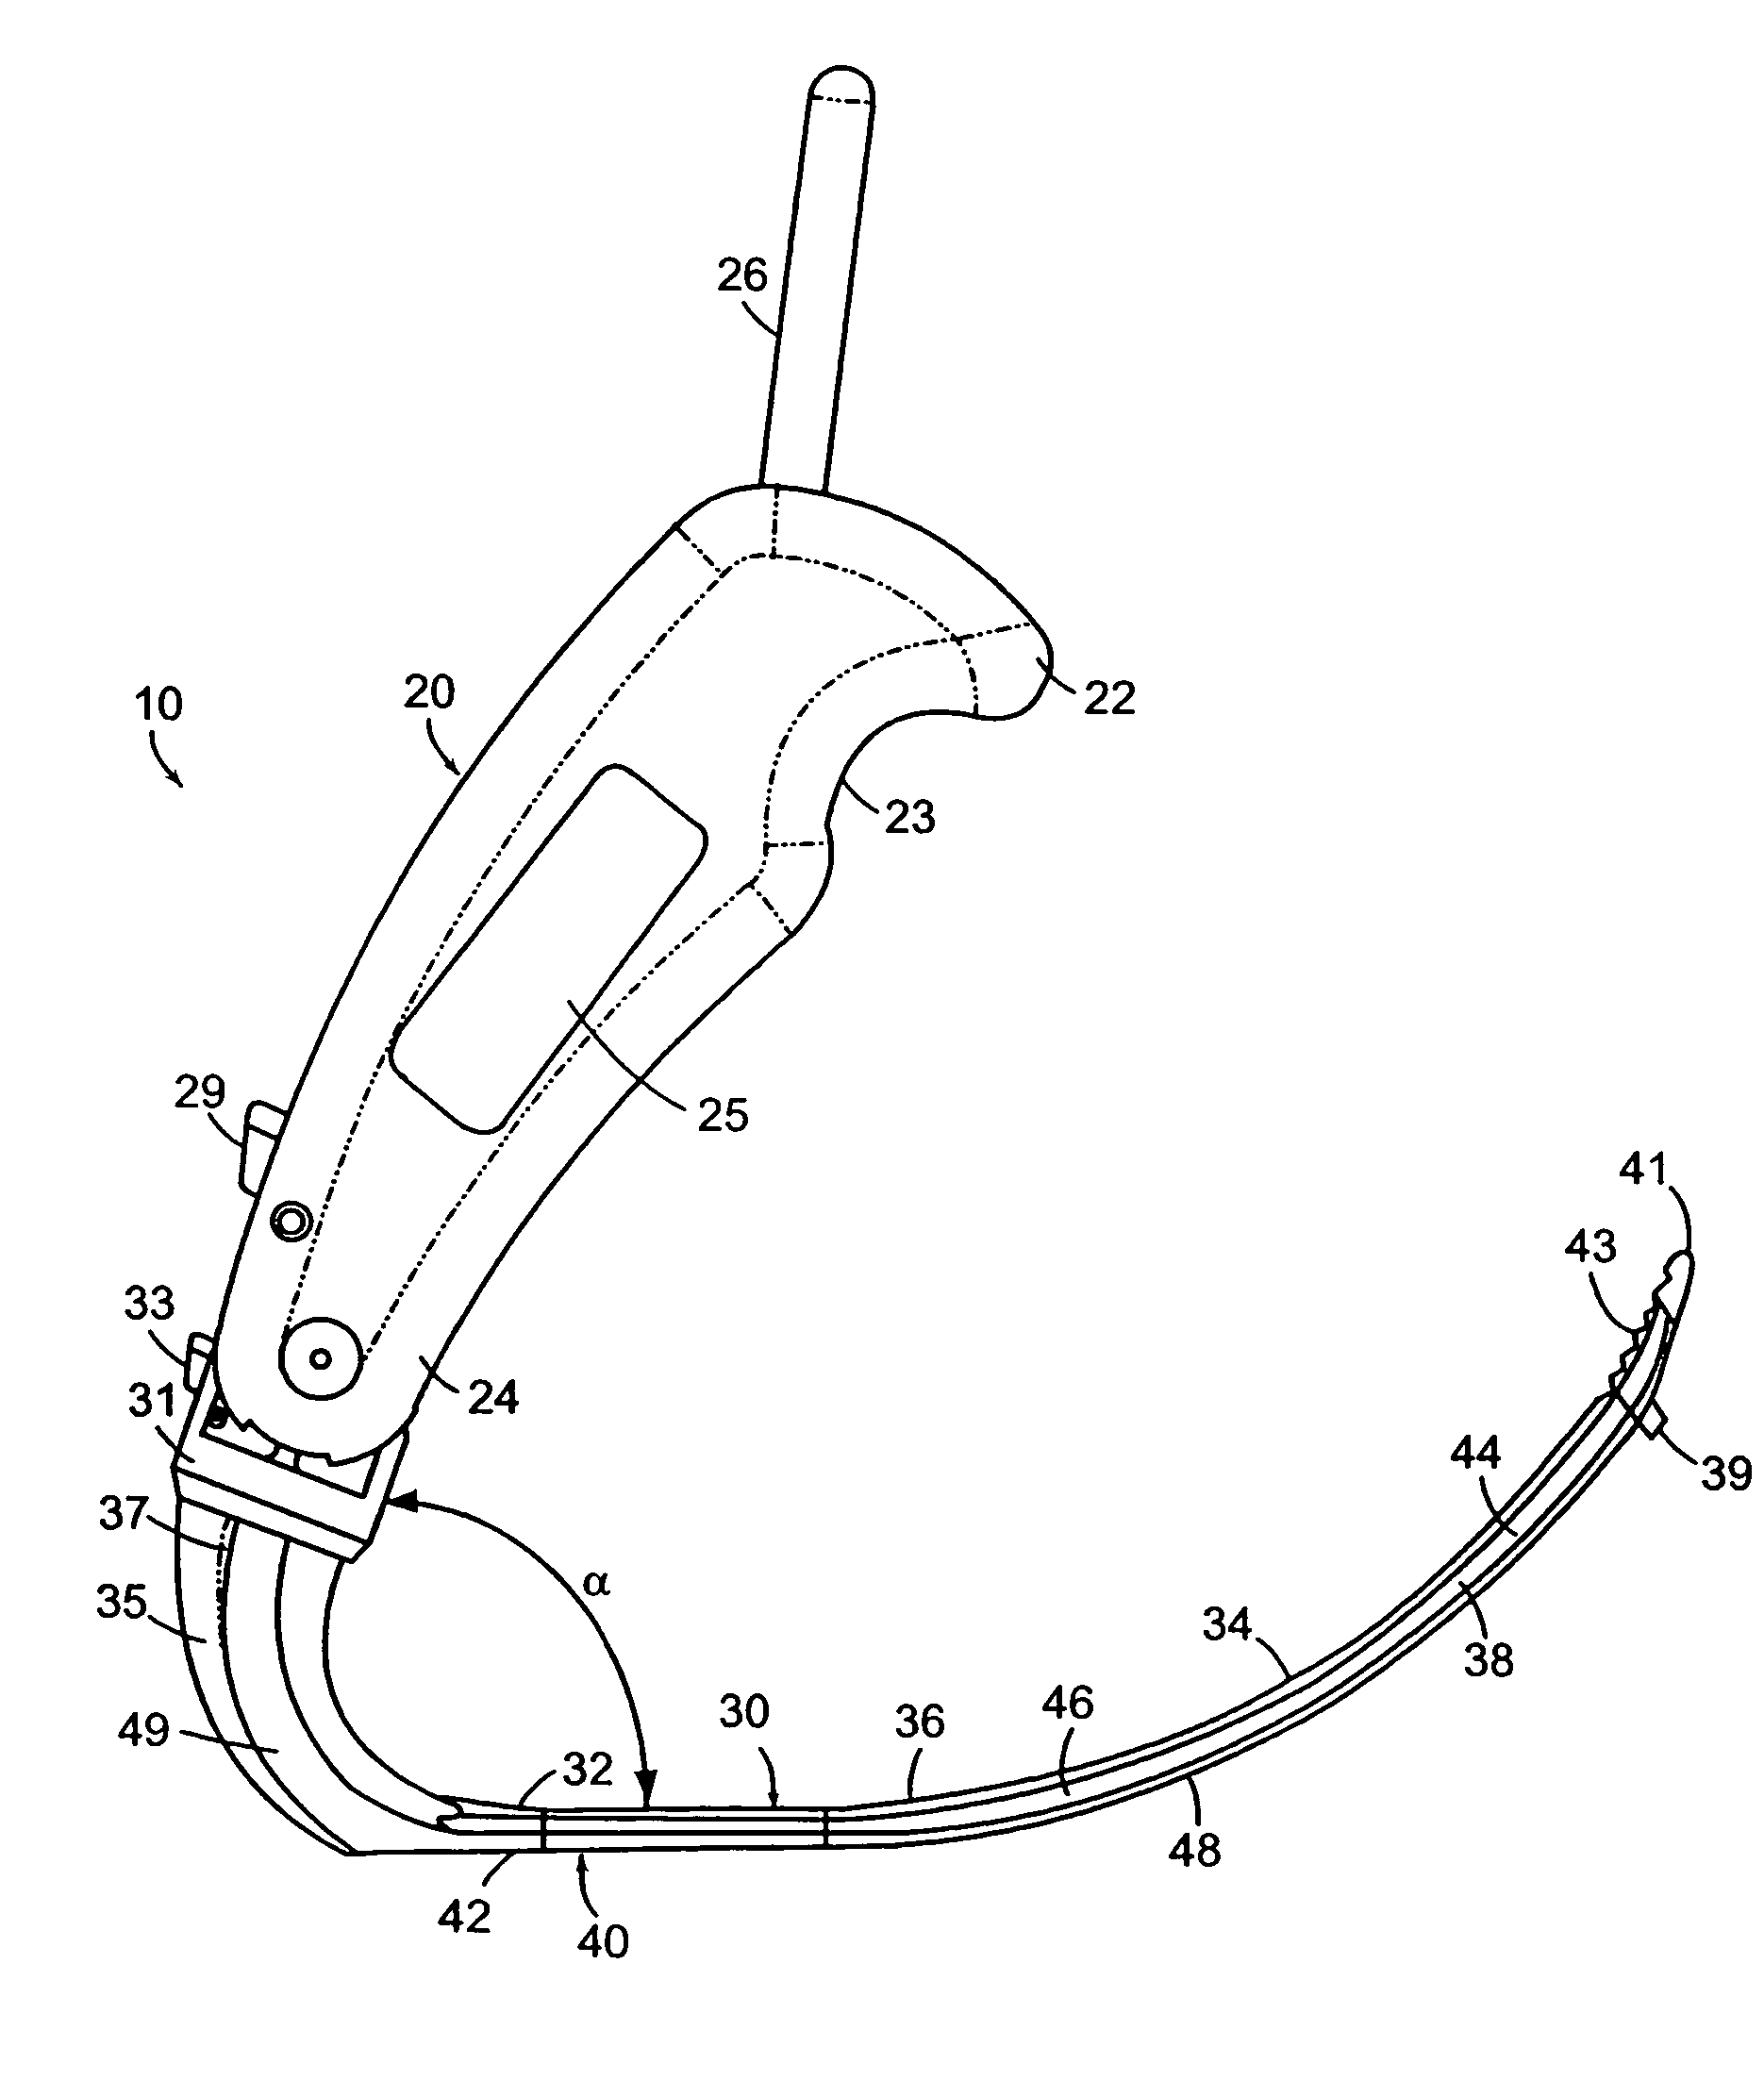 Illuminated retractor for use in connection with harvesting a blood vessel from the arm